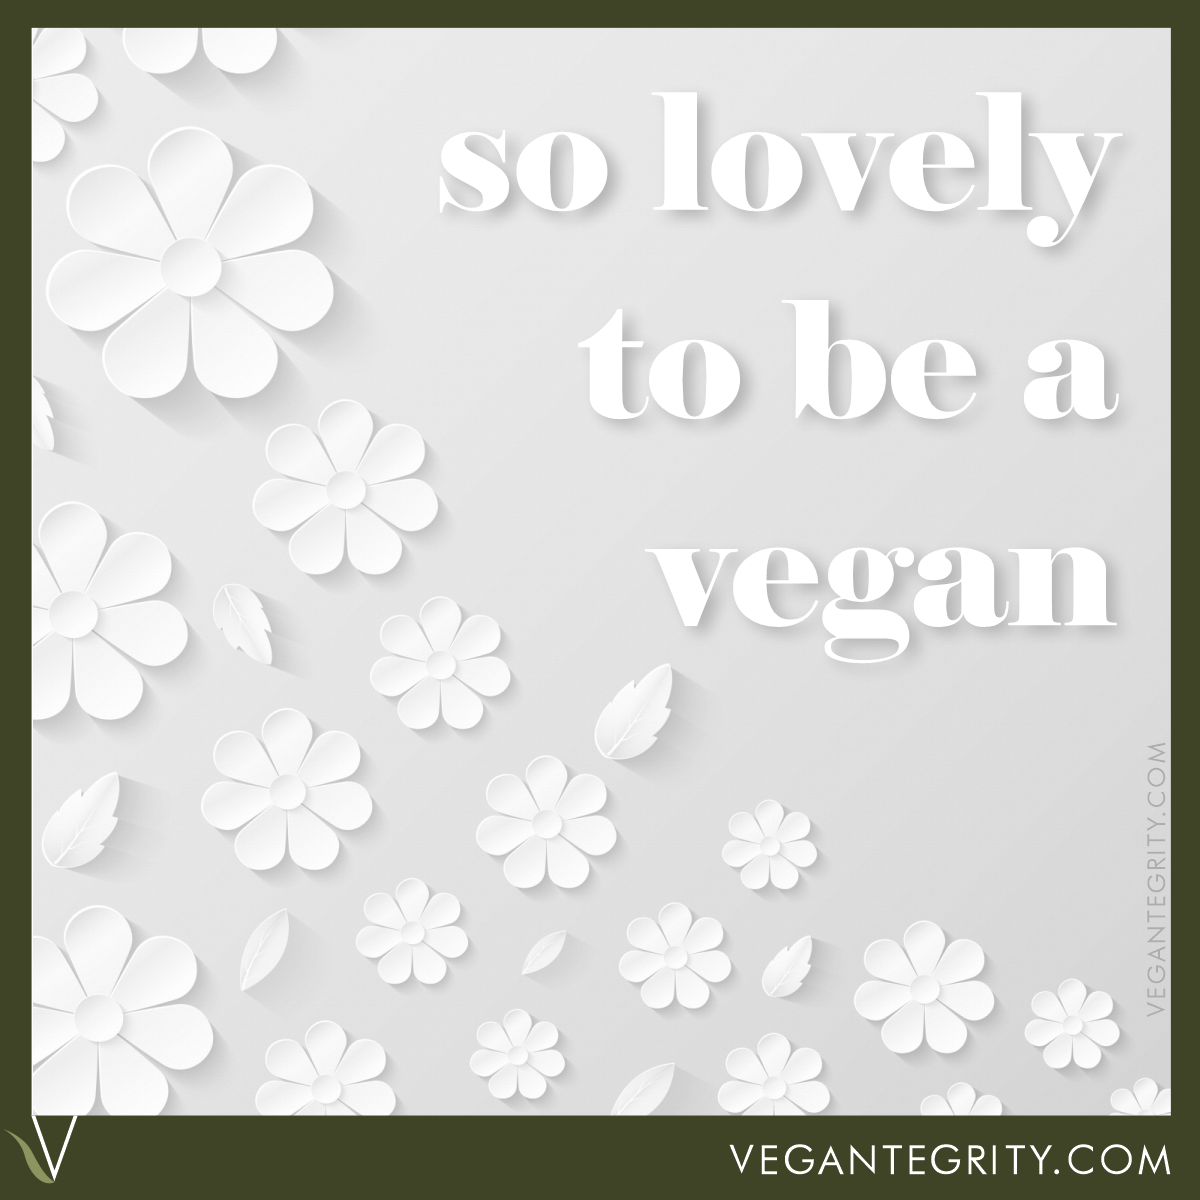 So lovely to be a vegan. Three-dimensional cutout white paper flowers on white paper background.